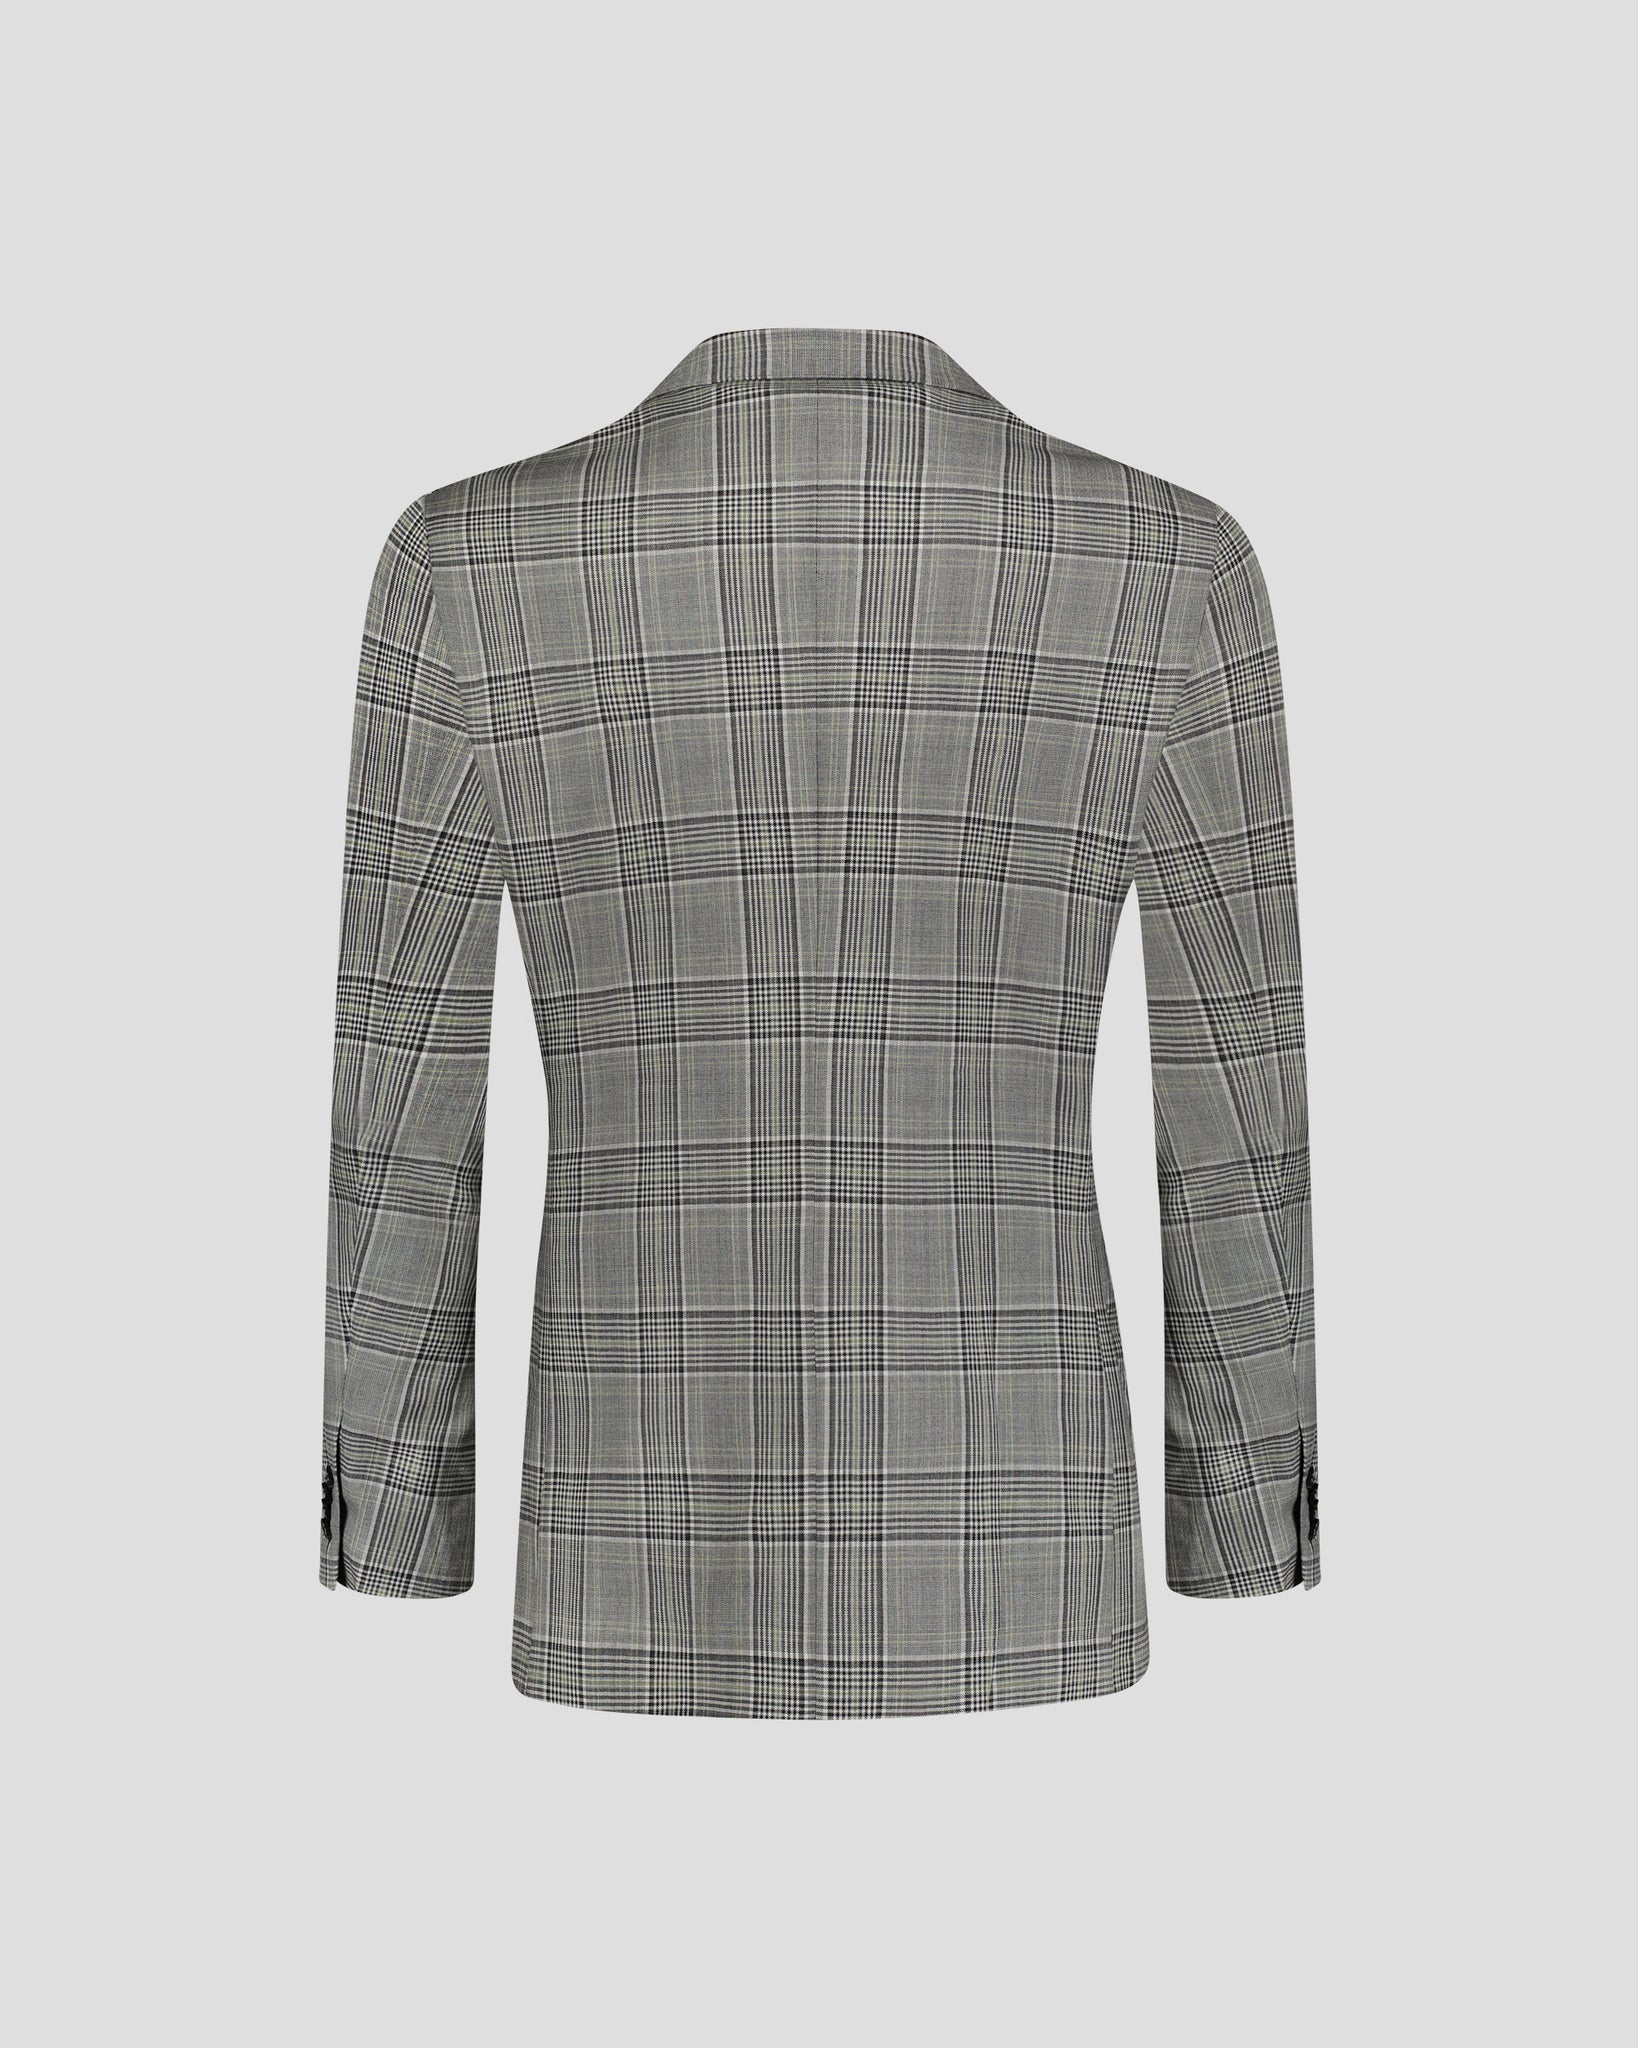 Southern Gents Single Breasted - Grey + Green Plaid